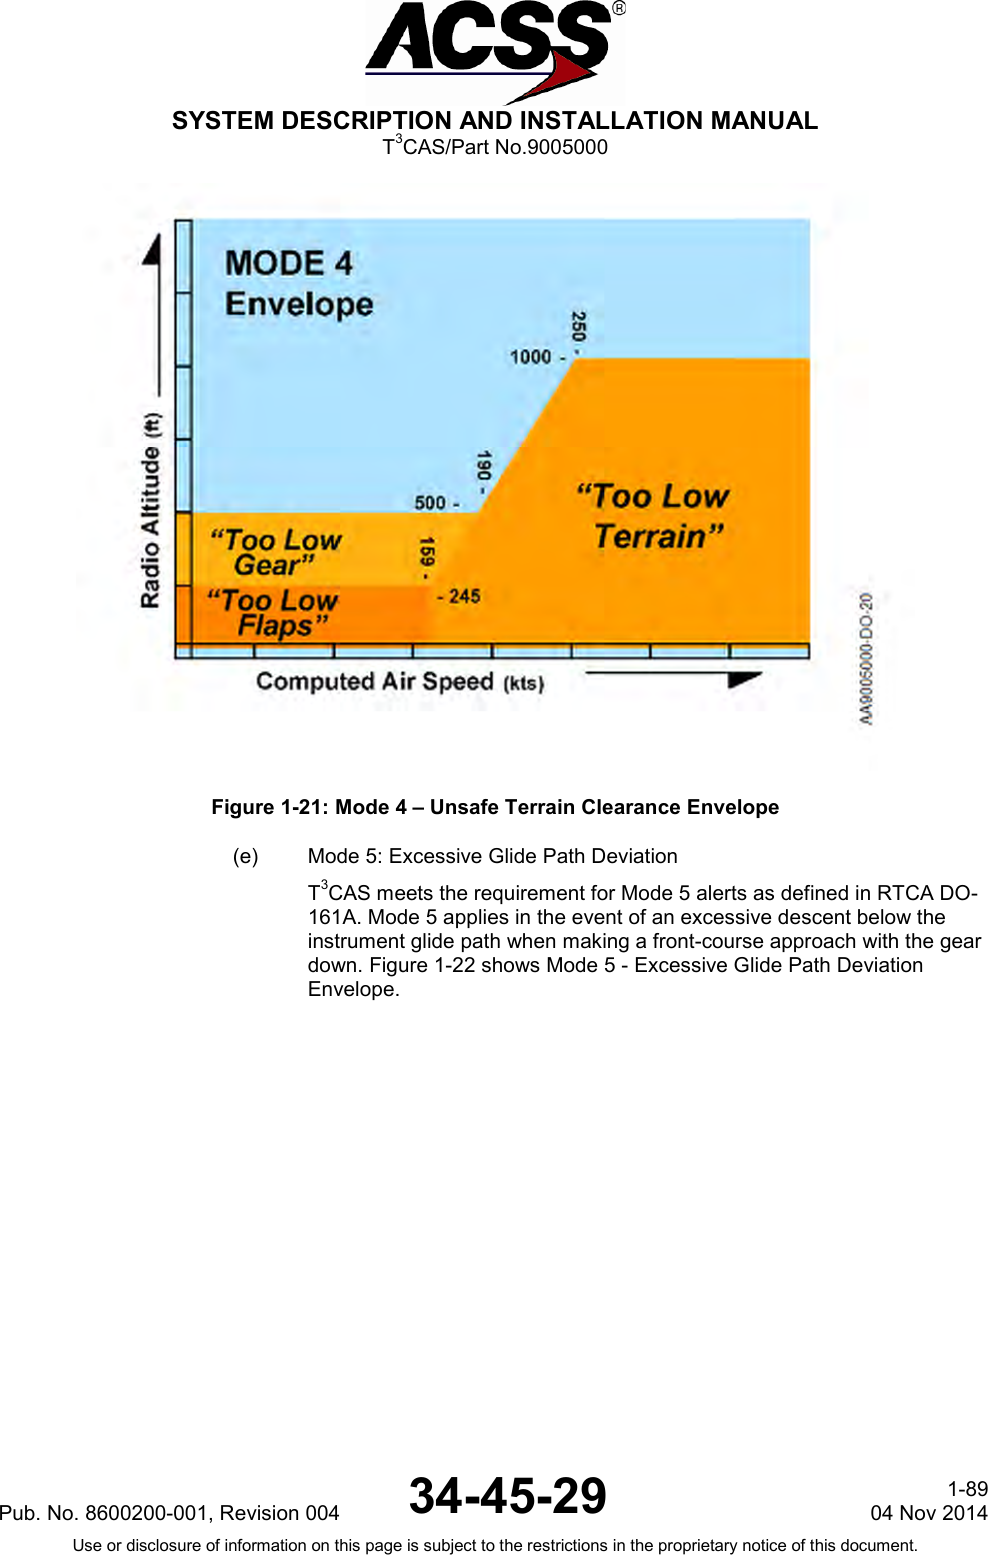  SYSTEM DESCRIPTION AND INSTALLATION MANUAL T3CAS/Part No.9005000  Figure 1-21: Mode 4 – Unsafe Terrain Clearance Envelope (e) Mode 5: Excessive Glide Path Deviation T3CAS meets the requirement for Mode 5 alerts as defined in RTCA DO-161A. Mode 5 applies in the event of an excessive descent below the instrument glide path when making a front-course approach with the gear down. Figure 1-22 shows Mode 5 - Excessive Glide Path Deviation Envelope. Pub. No. 8600200-001, Revision 004 34-45-29 1-89 04 Nov 2014 Use or disclosure of information on this page is subject to the restrictions in the proprietary notice of this document.  